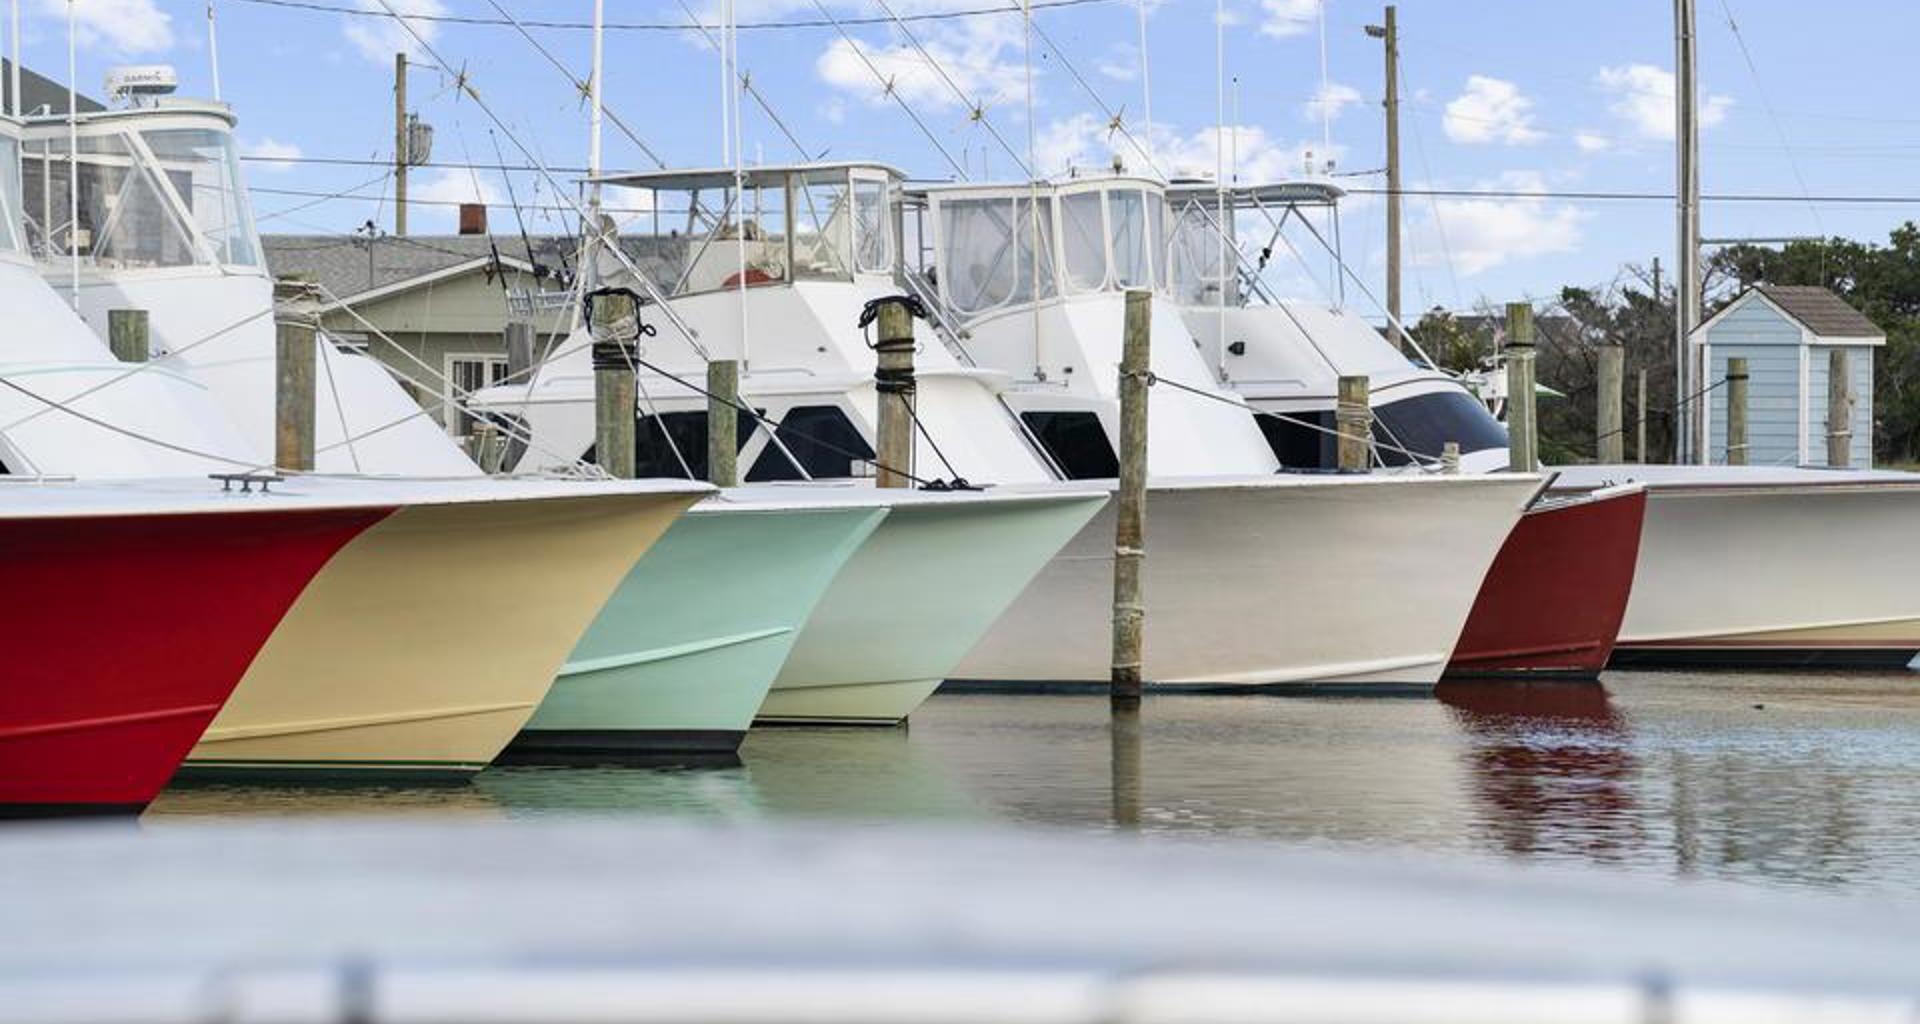 The colorful hulls of 7 charter fishing boats point out into the waters of the marina in Hatteras Village